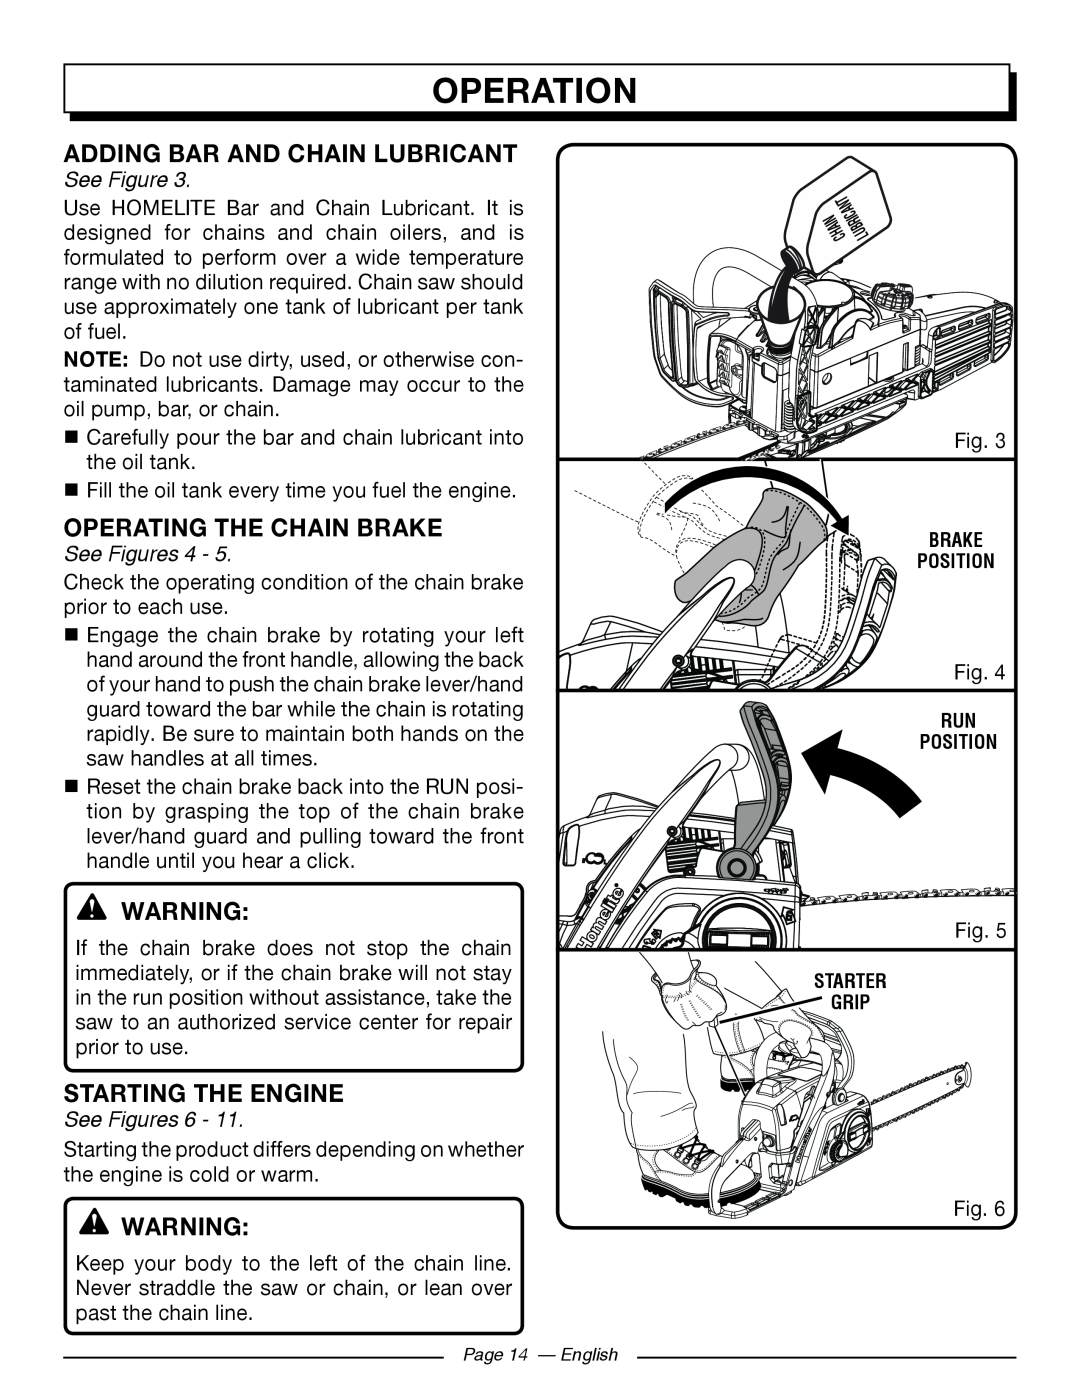 Homelite UT10564 Adding Bar And Chain Lubricant, Operating The Chain Brake, Starting The Engine, See Figures 4, Operation 